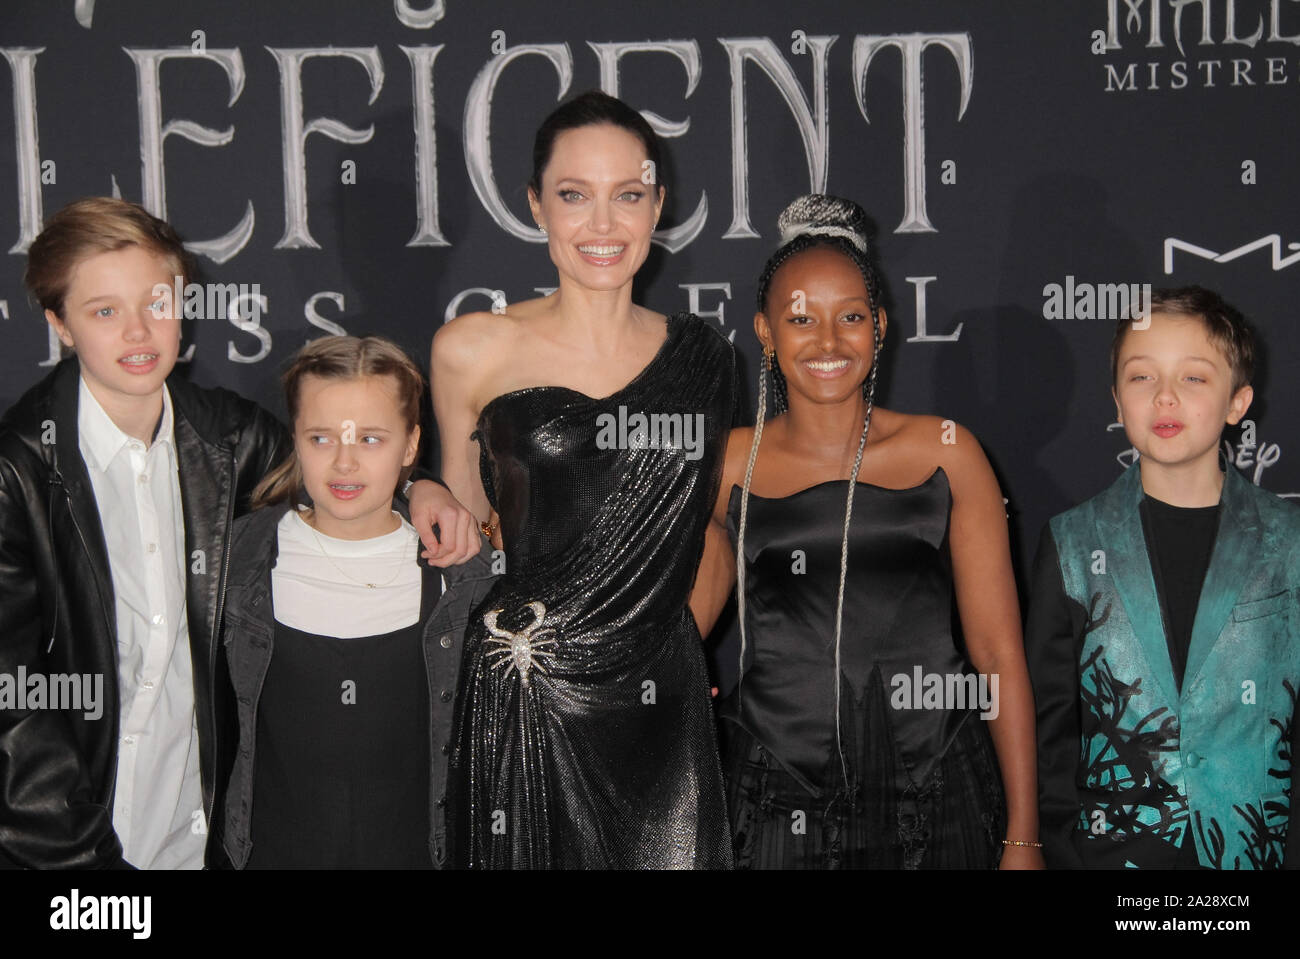 Shiloh Nouvel Jolie-Pitt, Vivienne Marcheline Jolie-Pitt, Angelina Jolie, Zahara Marley Jolie-Pitt, Knox Leon Jolie-Pitt  09/30/2019 The World Premiere of 'Maleficent: Mistress of Evil' held at the El CapitanTheatre in Los Angeles, CA. Photo by I. Hasegawa / HNW/PictureLux Stock Photo